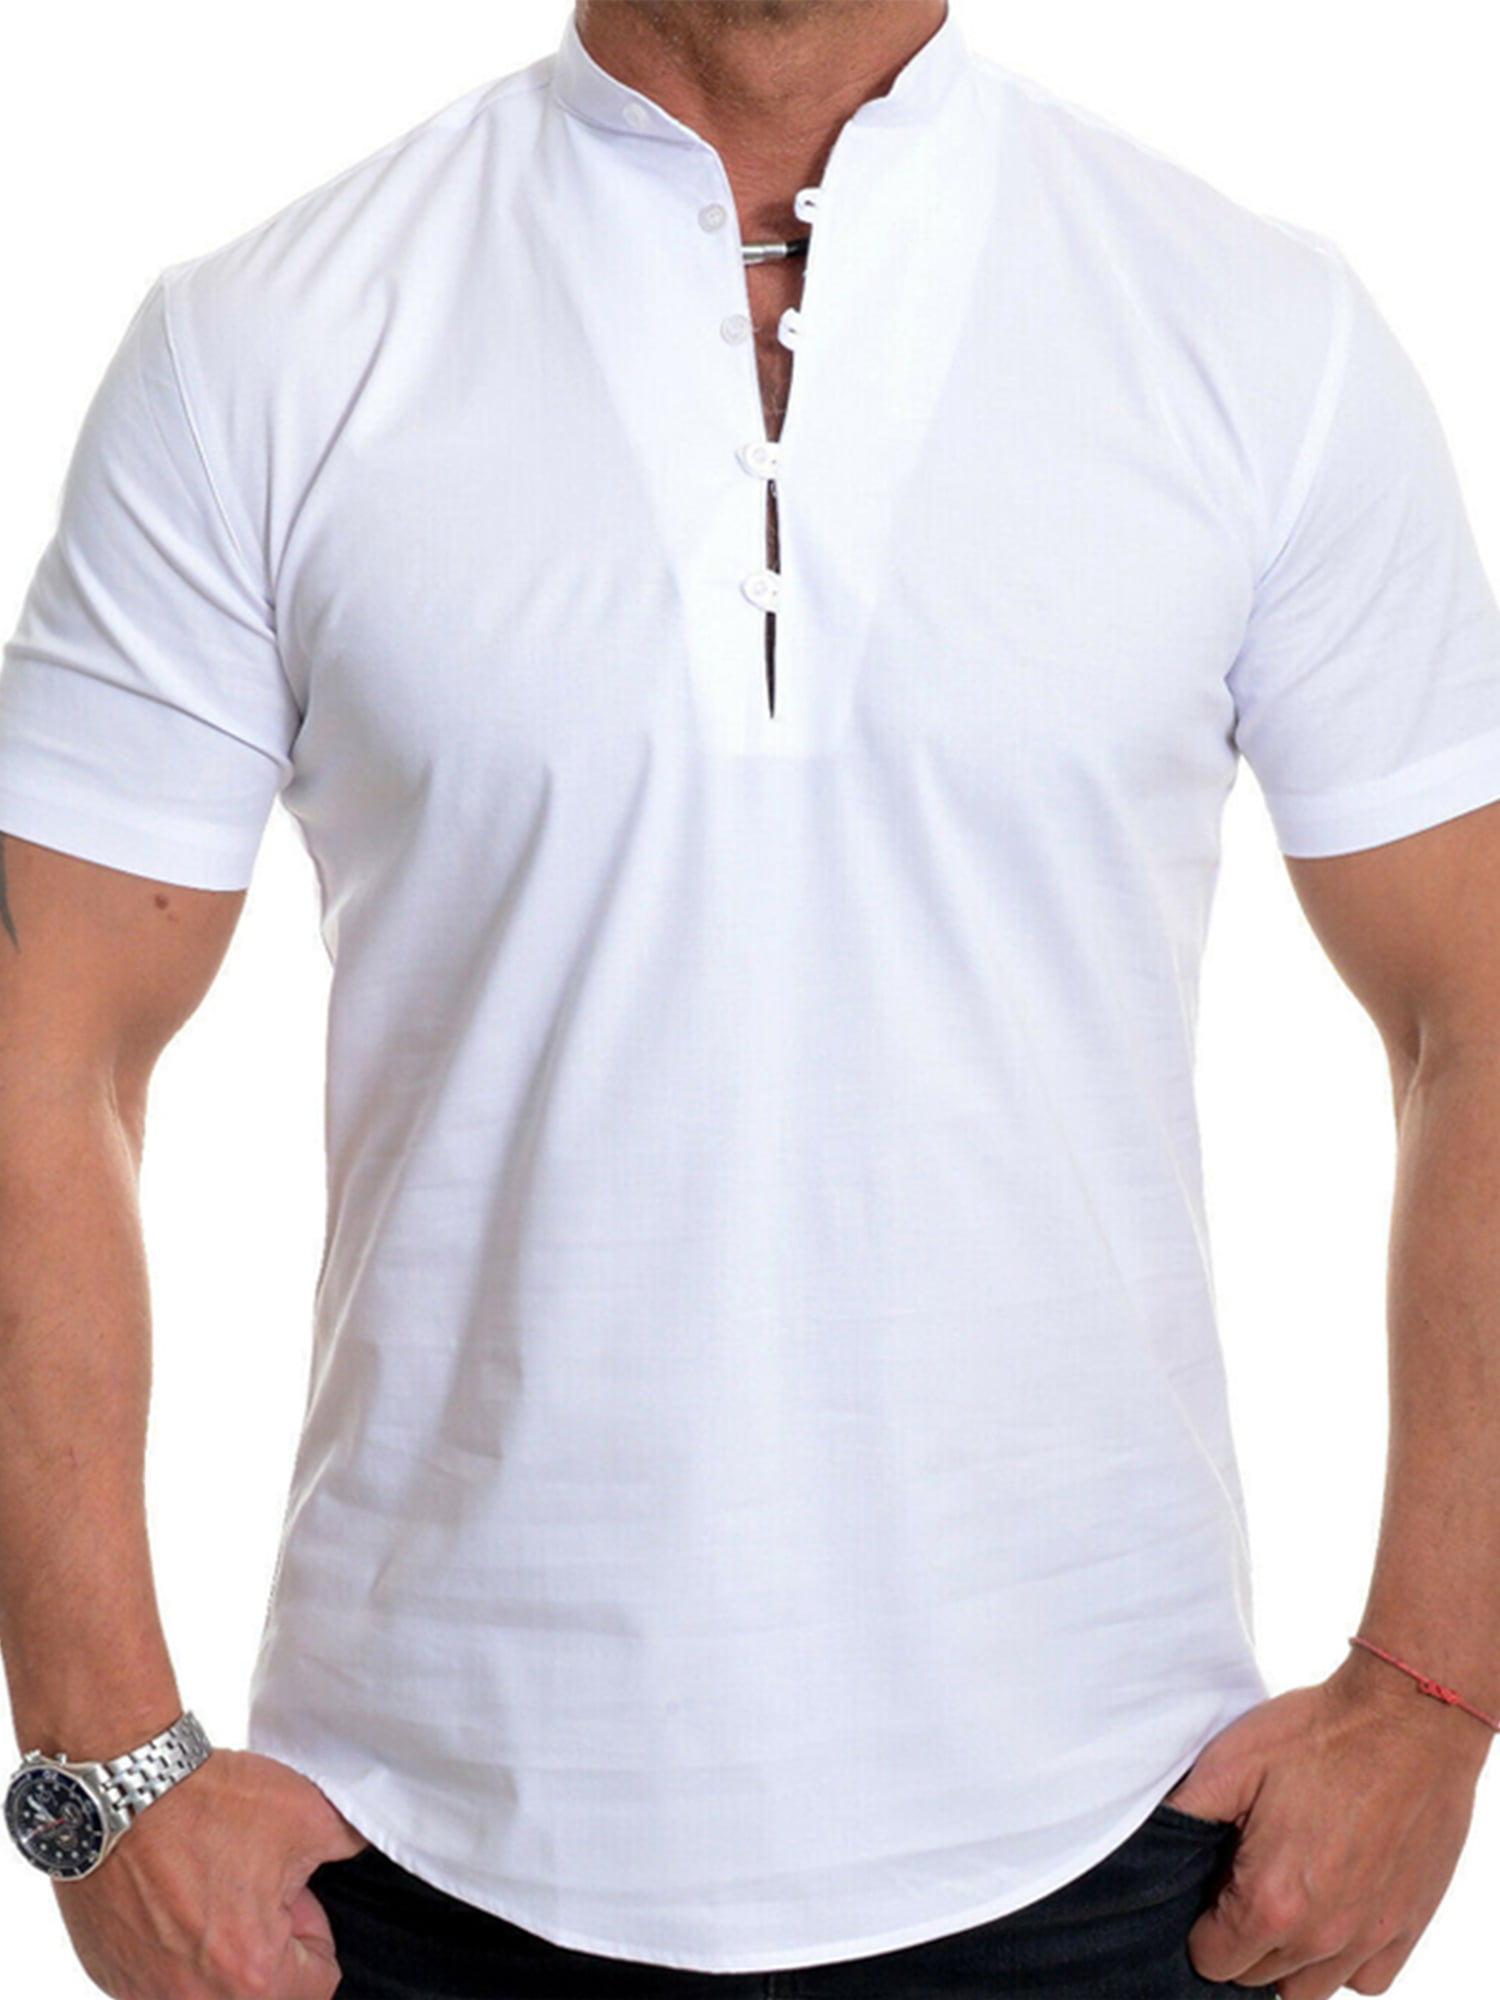 Lallc - Mens Button V Neck T-shirts Summer Muscle Casual Short Sleeve ...